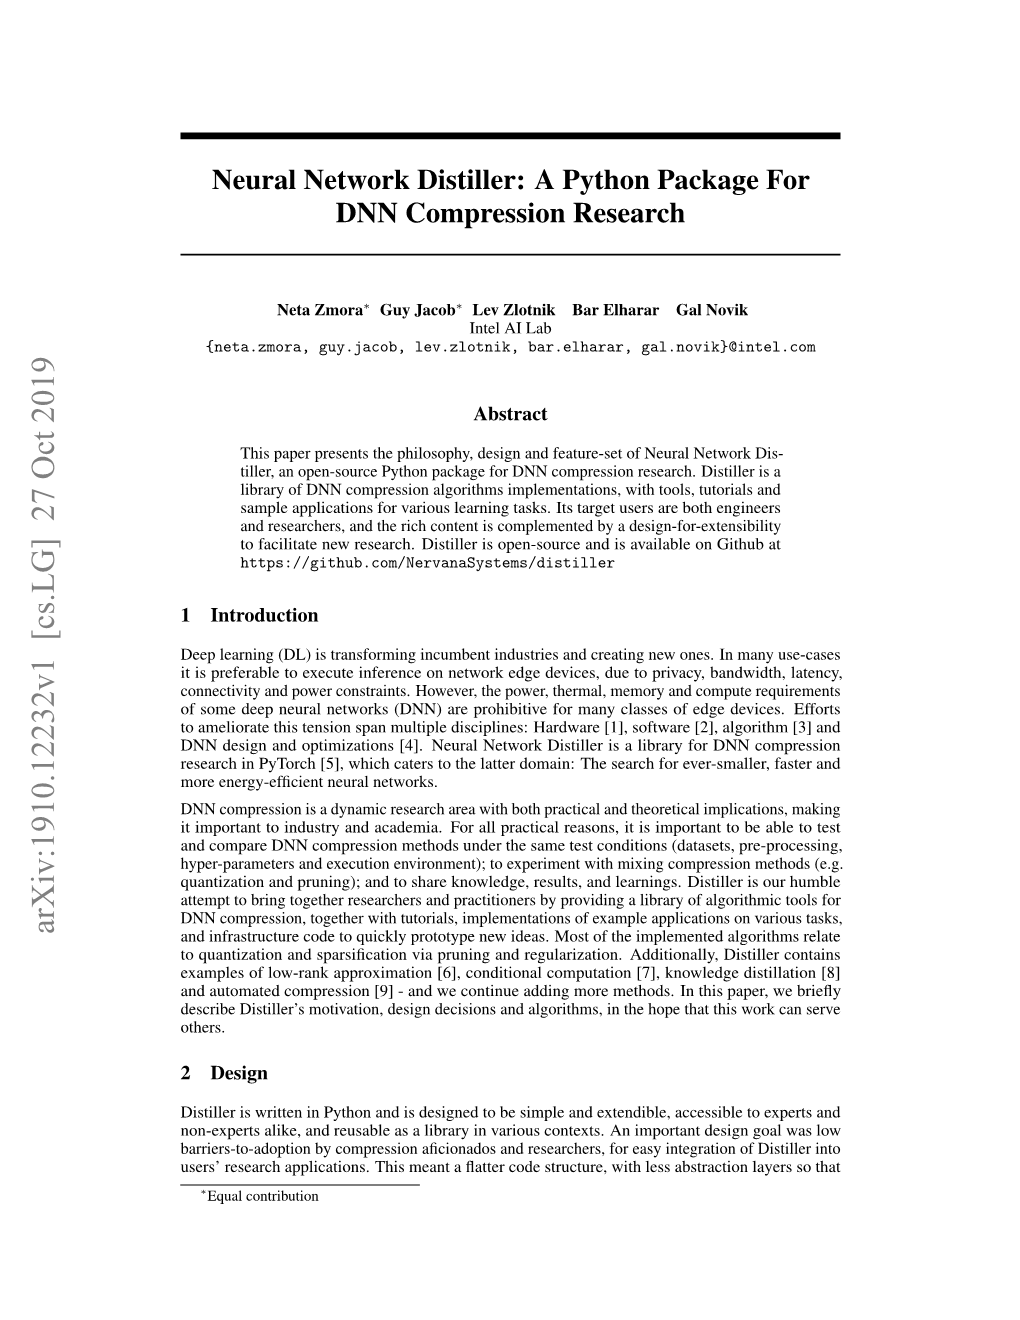 Neural Network Distiller: a Python Package for DNN Compression Research